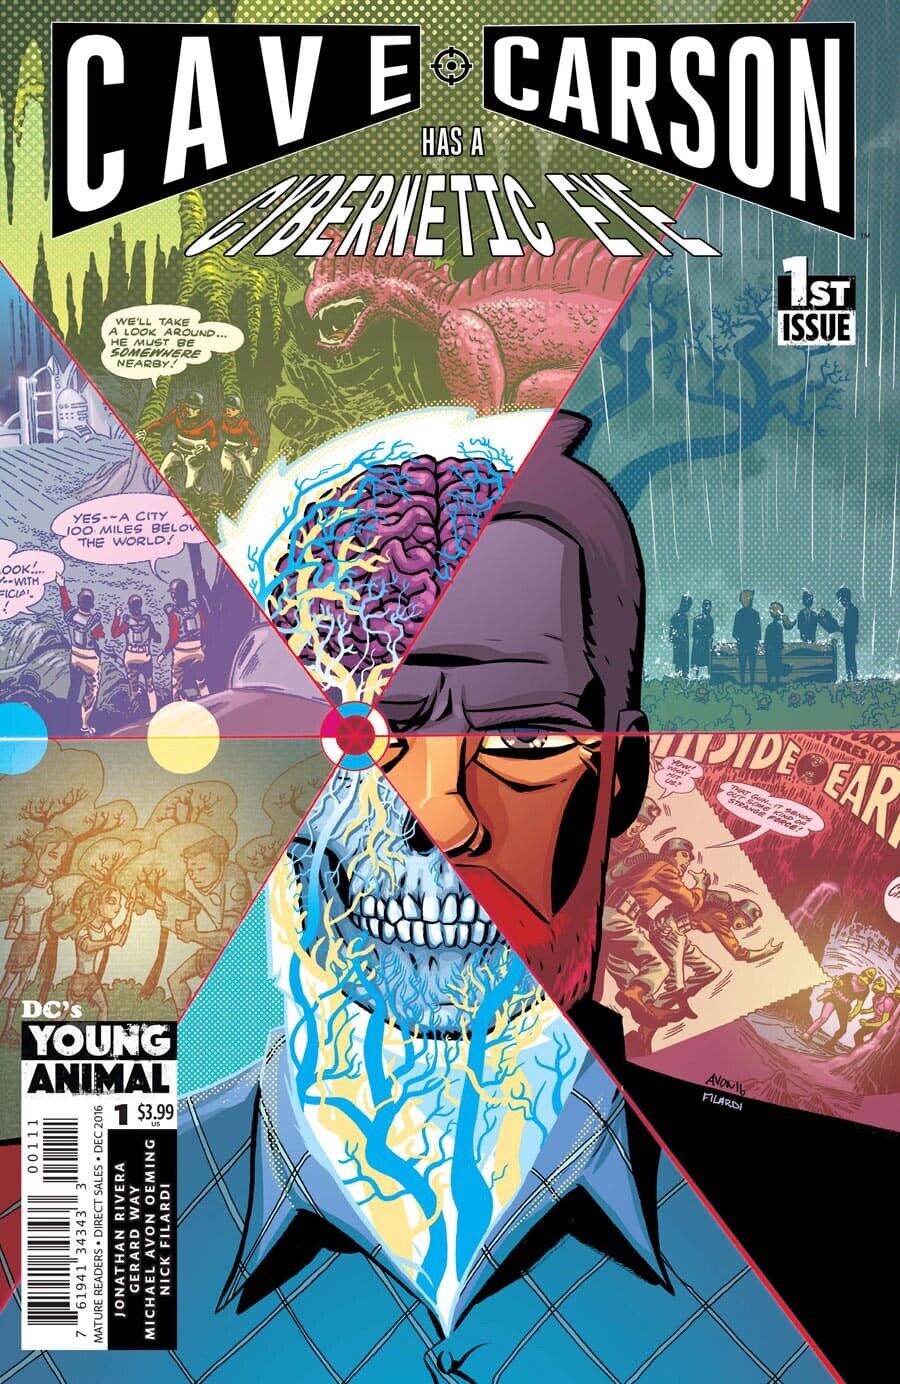 DC’s YOUNG ANIMAL “Cave Carson Has A Cybernetic Eye” 1 thru 12 + Rentier Variant